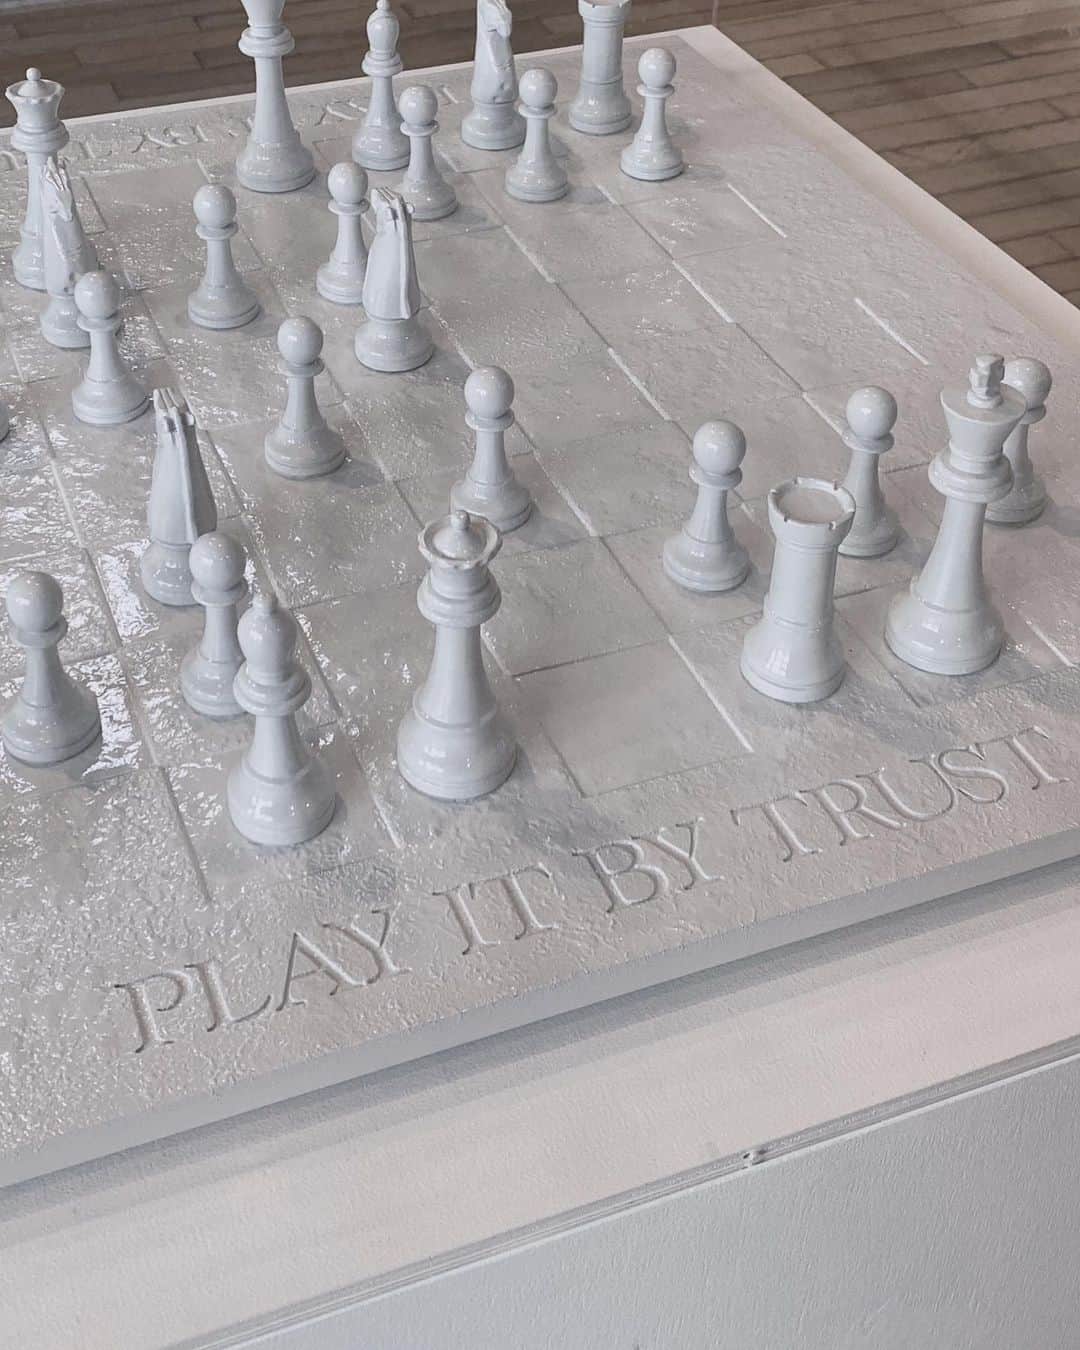 浅見姫香さんのインスタグラム写真 - (浅見姫香Instagram)「PLAY IT BY TRUST. On this pure white chessboard, as the game progresses, it becomes difficult to distinguish between your opponent's pieces and your own pieces. I can't see where the line between myself and others is. Yoko Ono's work contains a message that denies fighting and winning and losing, saying, "There is no distinction between friend and foe."  Recently I've been interested in Joseph Beuys. He did a chaotic performance, painting his face with honey and gold leaf, holding a dead rabbit, and explaining his work to the rabbit. Boyce's recounts about his own past may or may not be true. However, I believe in the words he left behind, "Art is the only power to free humankind from all repression."  この真っ白なチェス盤でゲームを続けていくと、相手の駒と自分の駒の見分けがつかなくなる。果たして、自分の駒はどれなのか。自分と相手の境界線はどこにあるのかが見えない。そうなると「敵味方の区別も無い」と言う。争いや勝ち負けを否定したメッセージが込められたオノ・ヨーコ氏の作品。  そして最近、興味をもったヨーゼフ・ボイス。 顔に金箔やはちみつを塗り、死んだ兎を抱えながら、兎に自作を説明をすると言う、なんともカオスなパフォーマンスをした彼。ボイスが語った自身の過去は、真実かどうかは分からないとされている。だが、彼が残した「芸術は、あらゆる抑圧から人類を解放する唯一の力である。」と言う言葉は信じている。」6月3日 22時13分 - himeka_asami_official